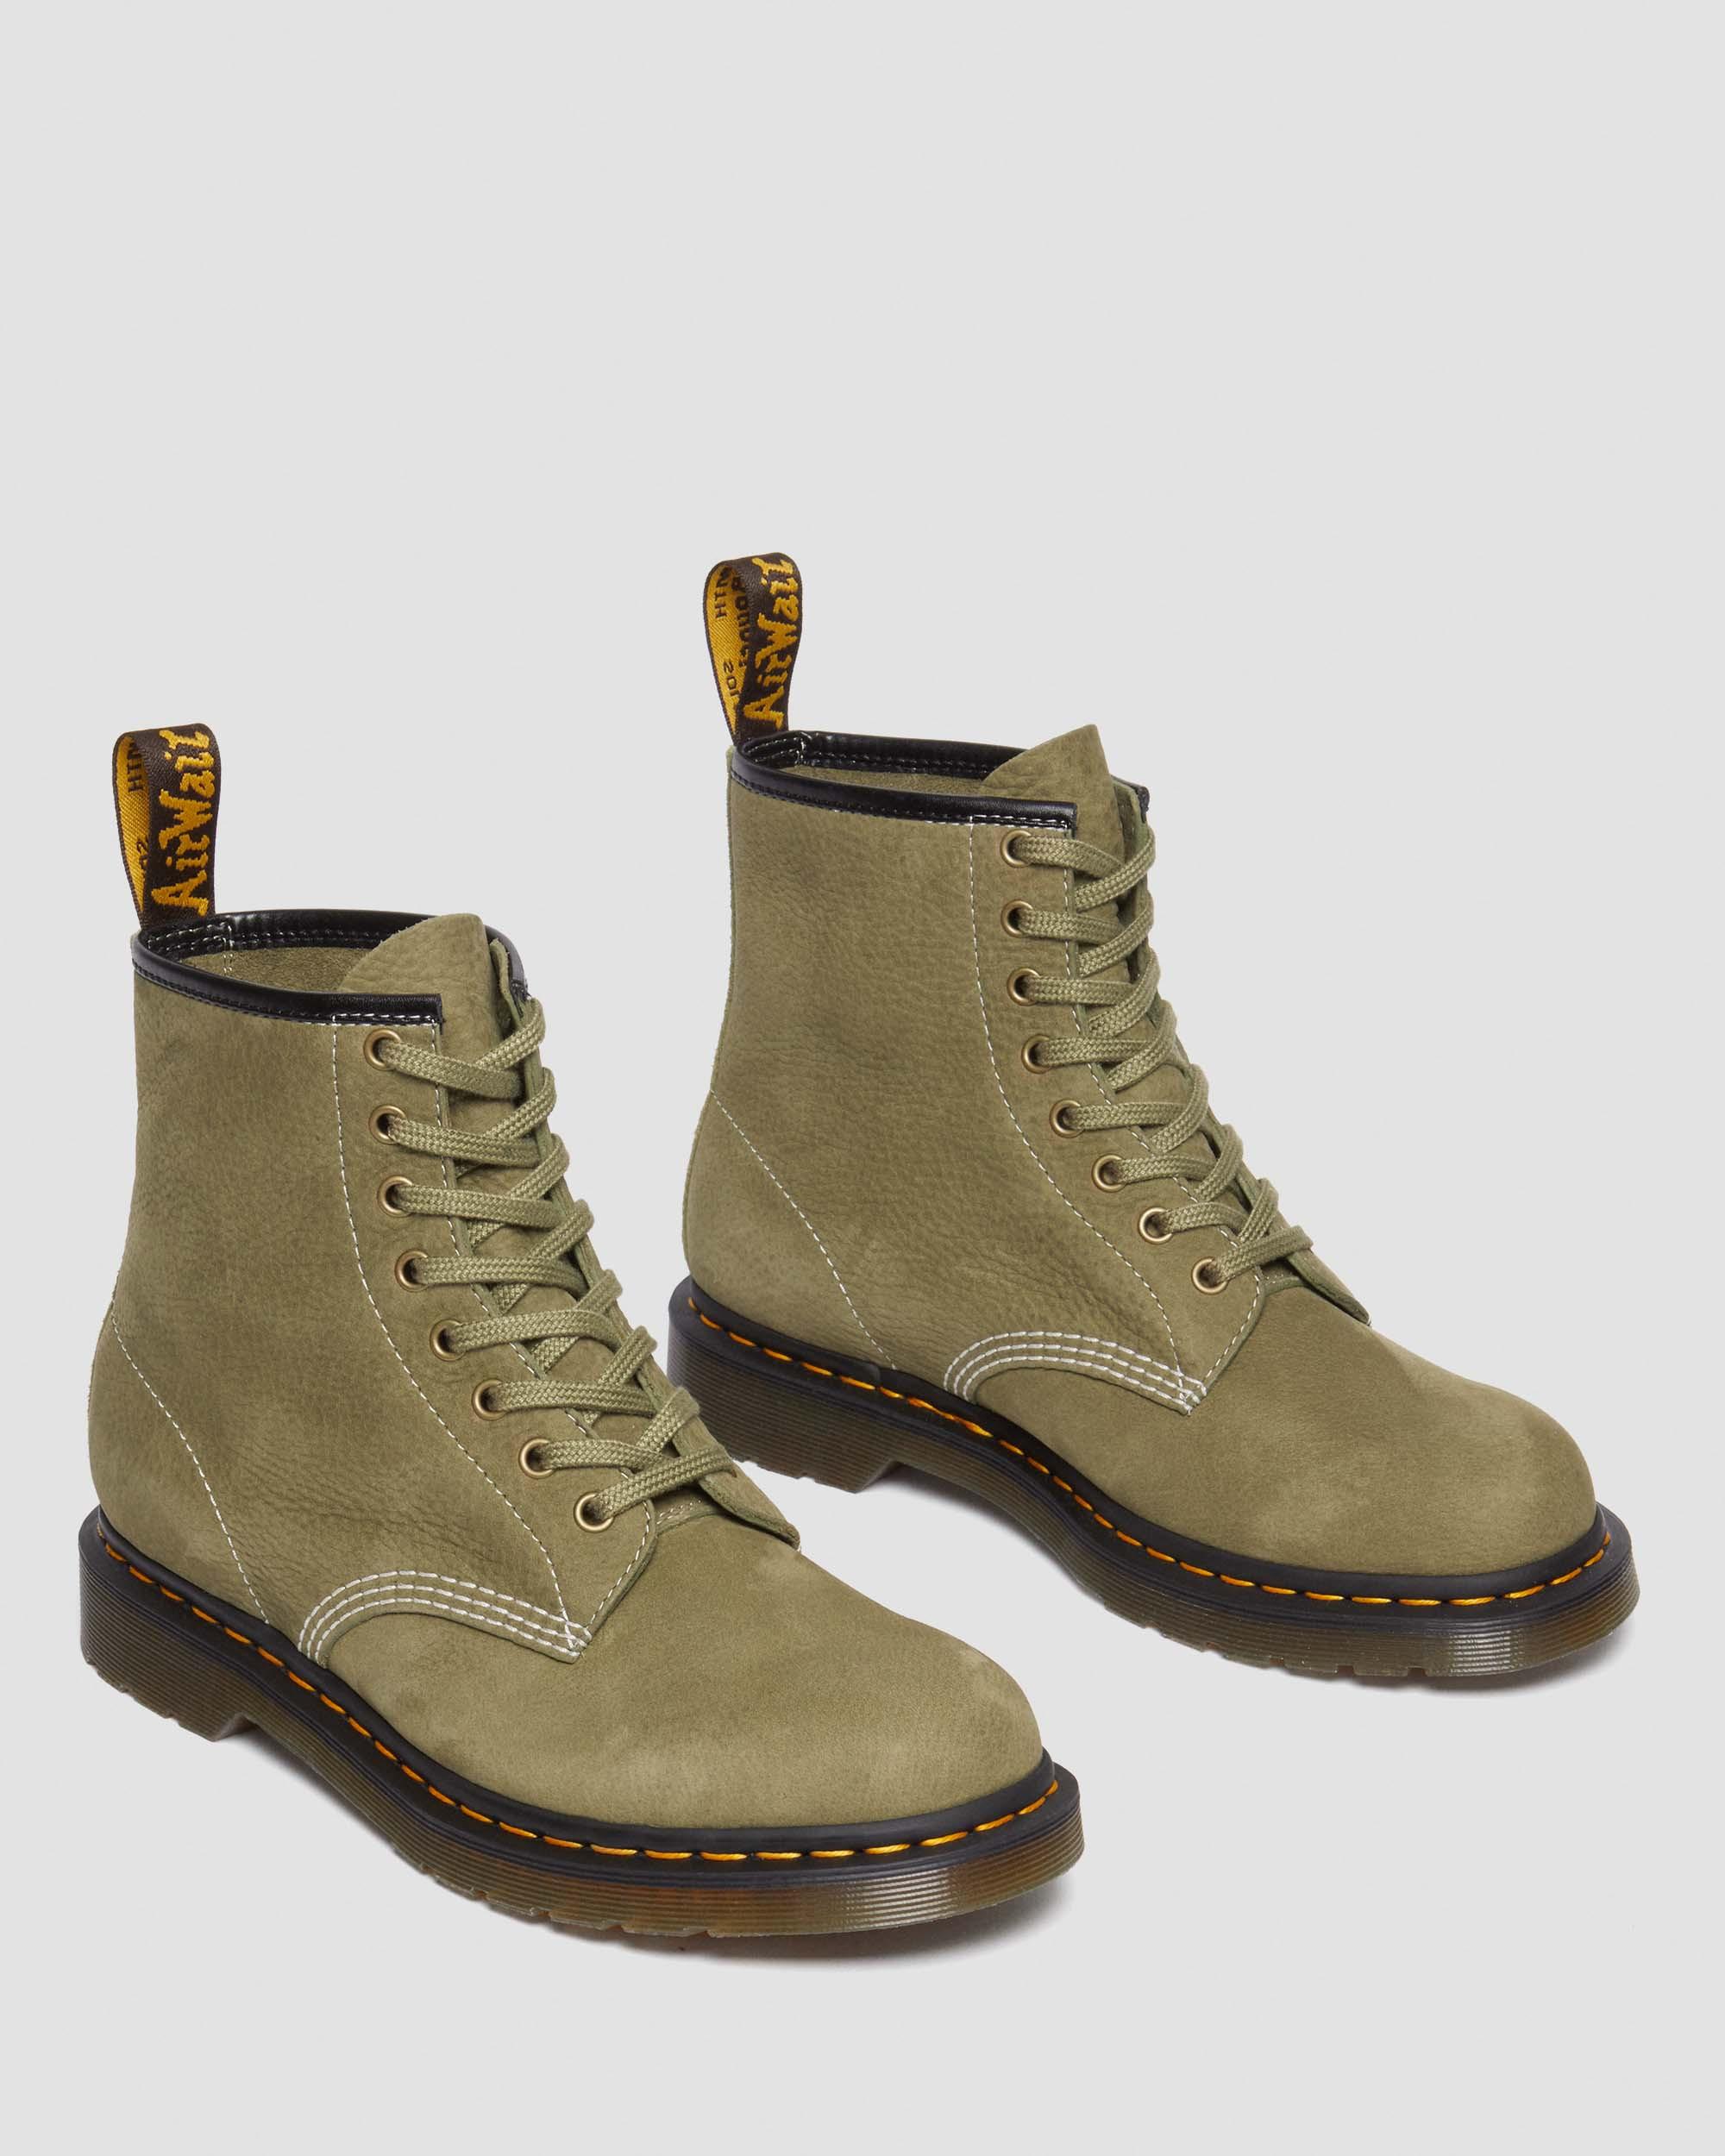 1460 Tumbled Nubuck Leather Lace Up Boots in Muted Olive